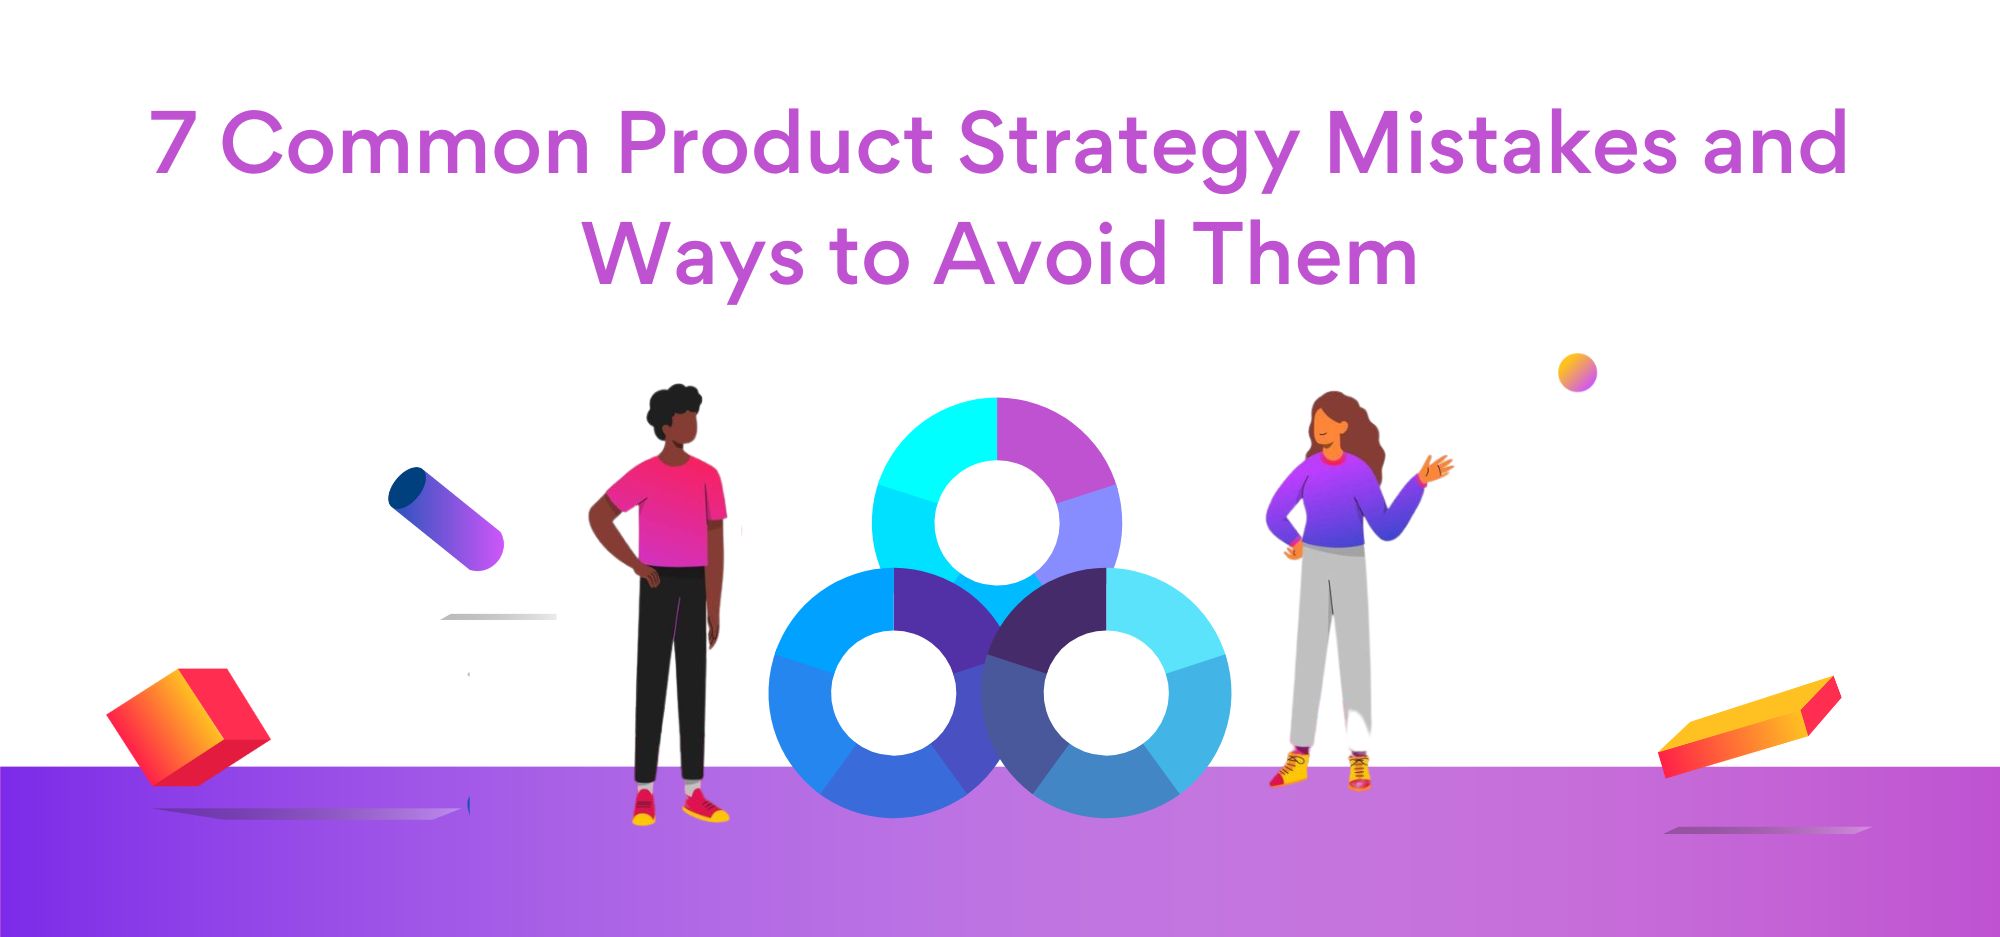 7 Common Product Strategy Mistakes and Ways to Avoid Them